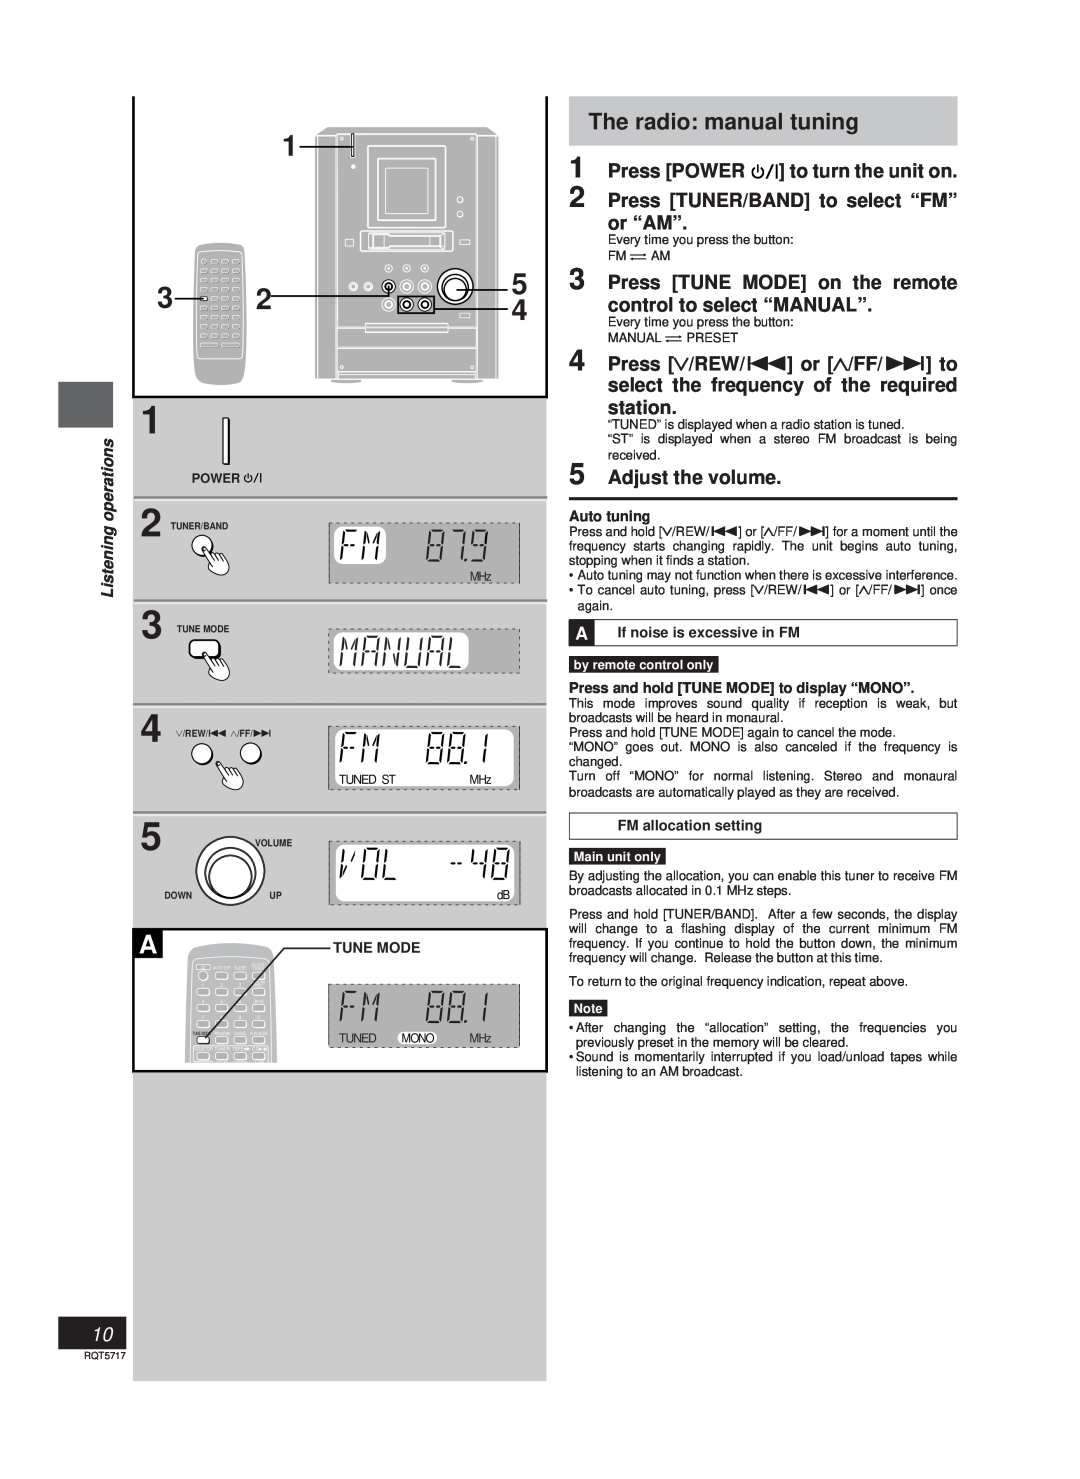 Panasonic SC-PM25 The radio manual tuning, Press POWER, to turn the unit on, Press TUNER/BAND to select “FM”, or “AM” 